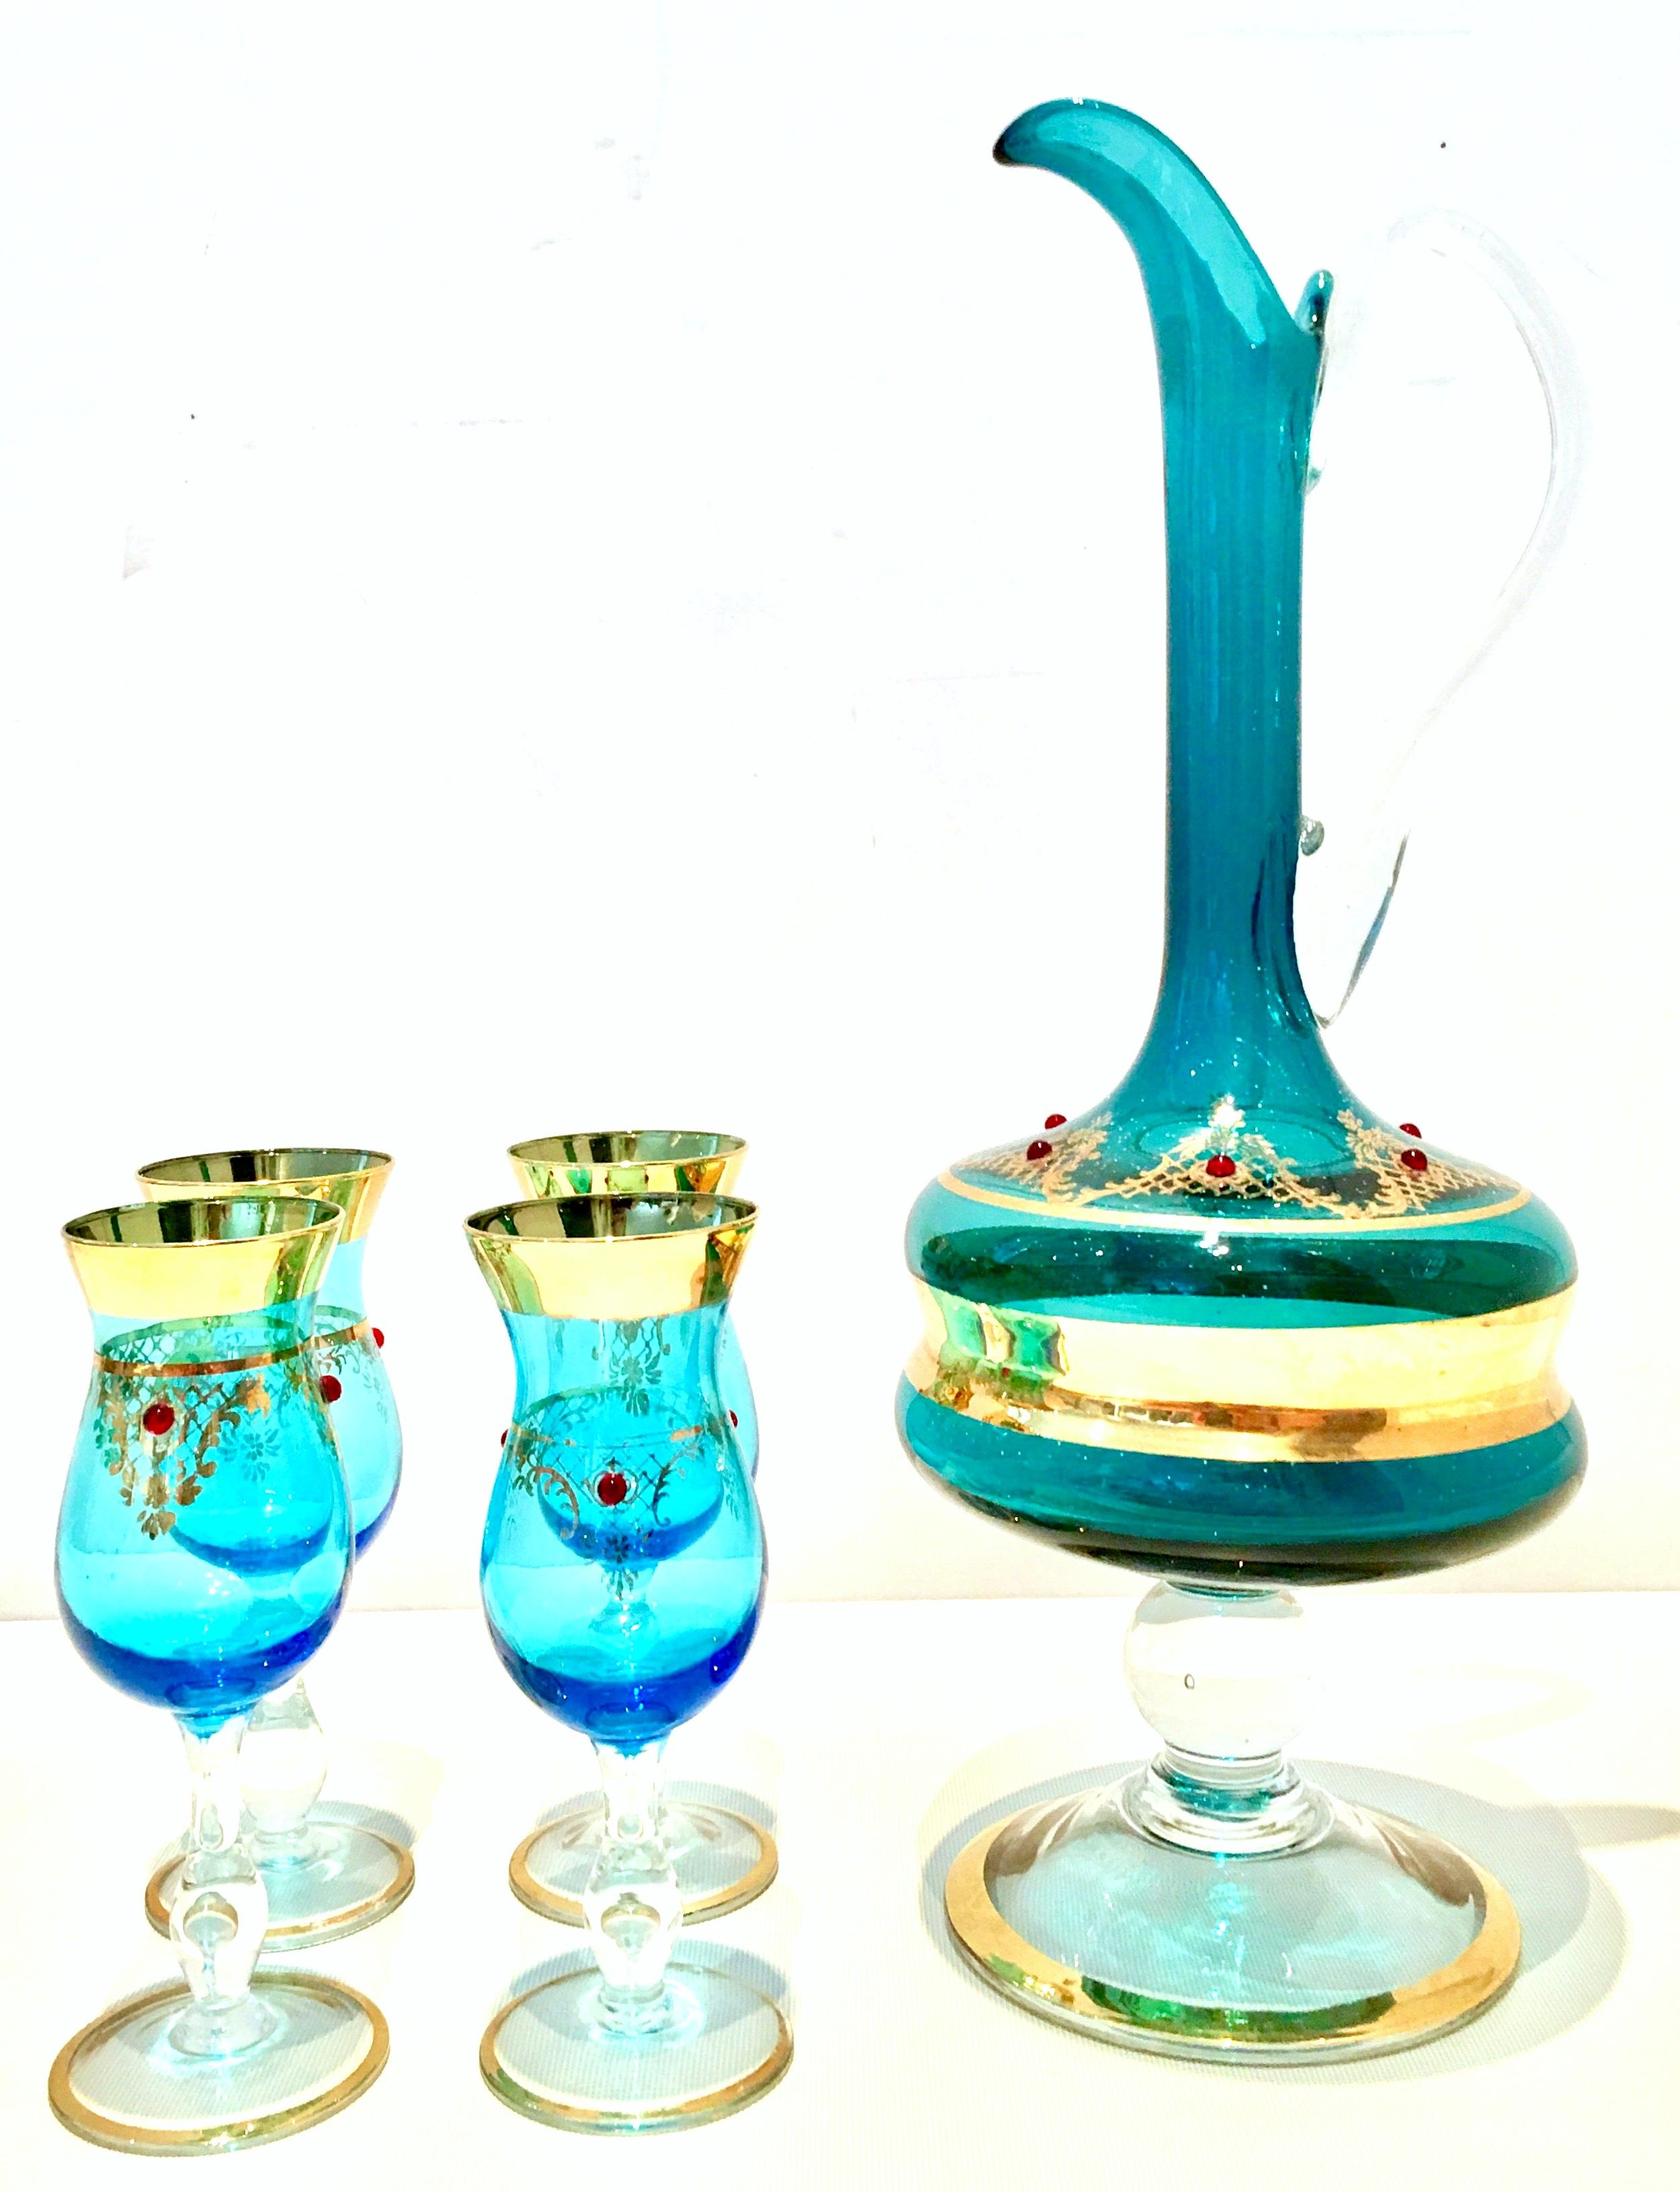 Midcentury Italian Venetian blown glass and 22-karat gold, crystal ruby jeweled drinks set of 5 pieces. This lovely handmade drinks set features a vivid blue ground with 22-karat gold Hand-painted detail and ruby red crystal rhinestone detail. Set